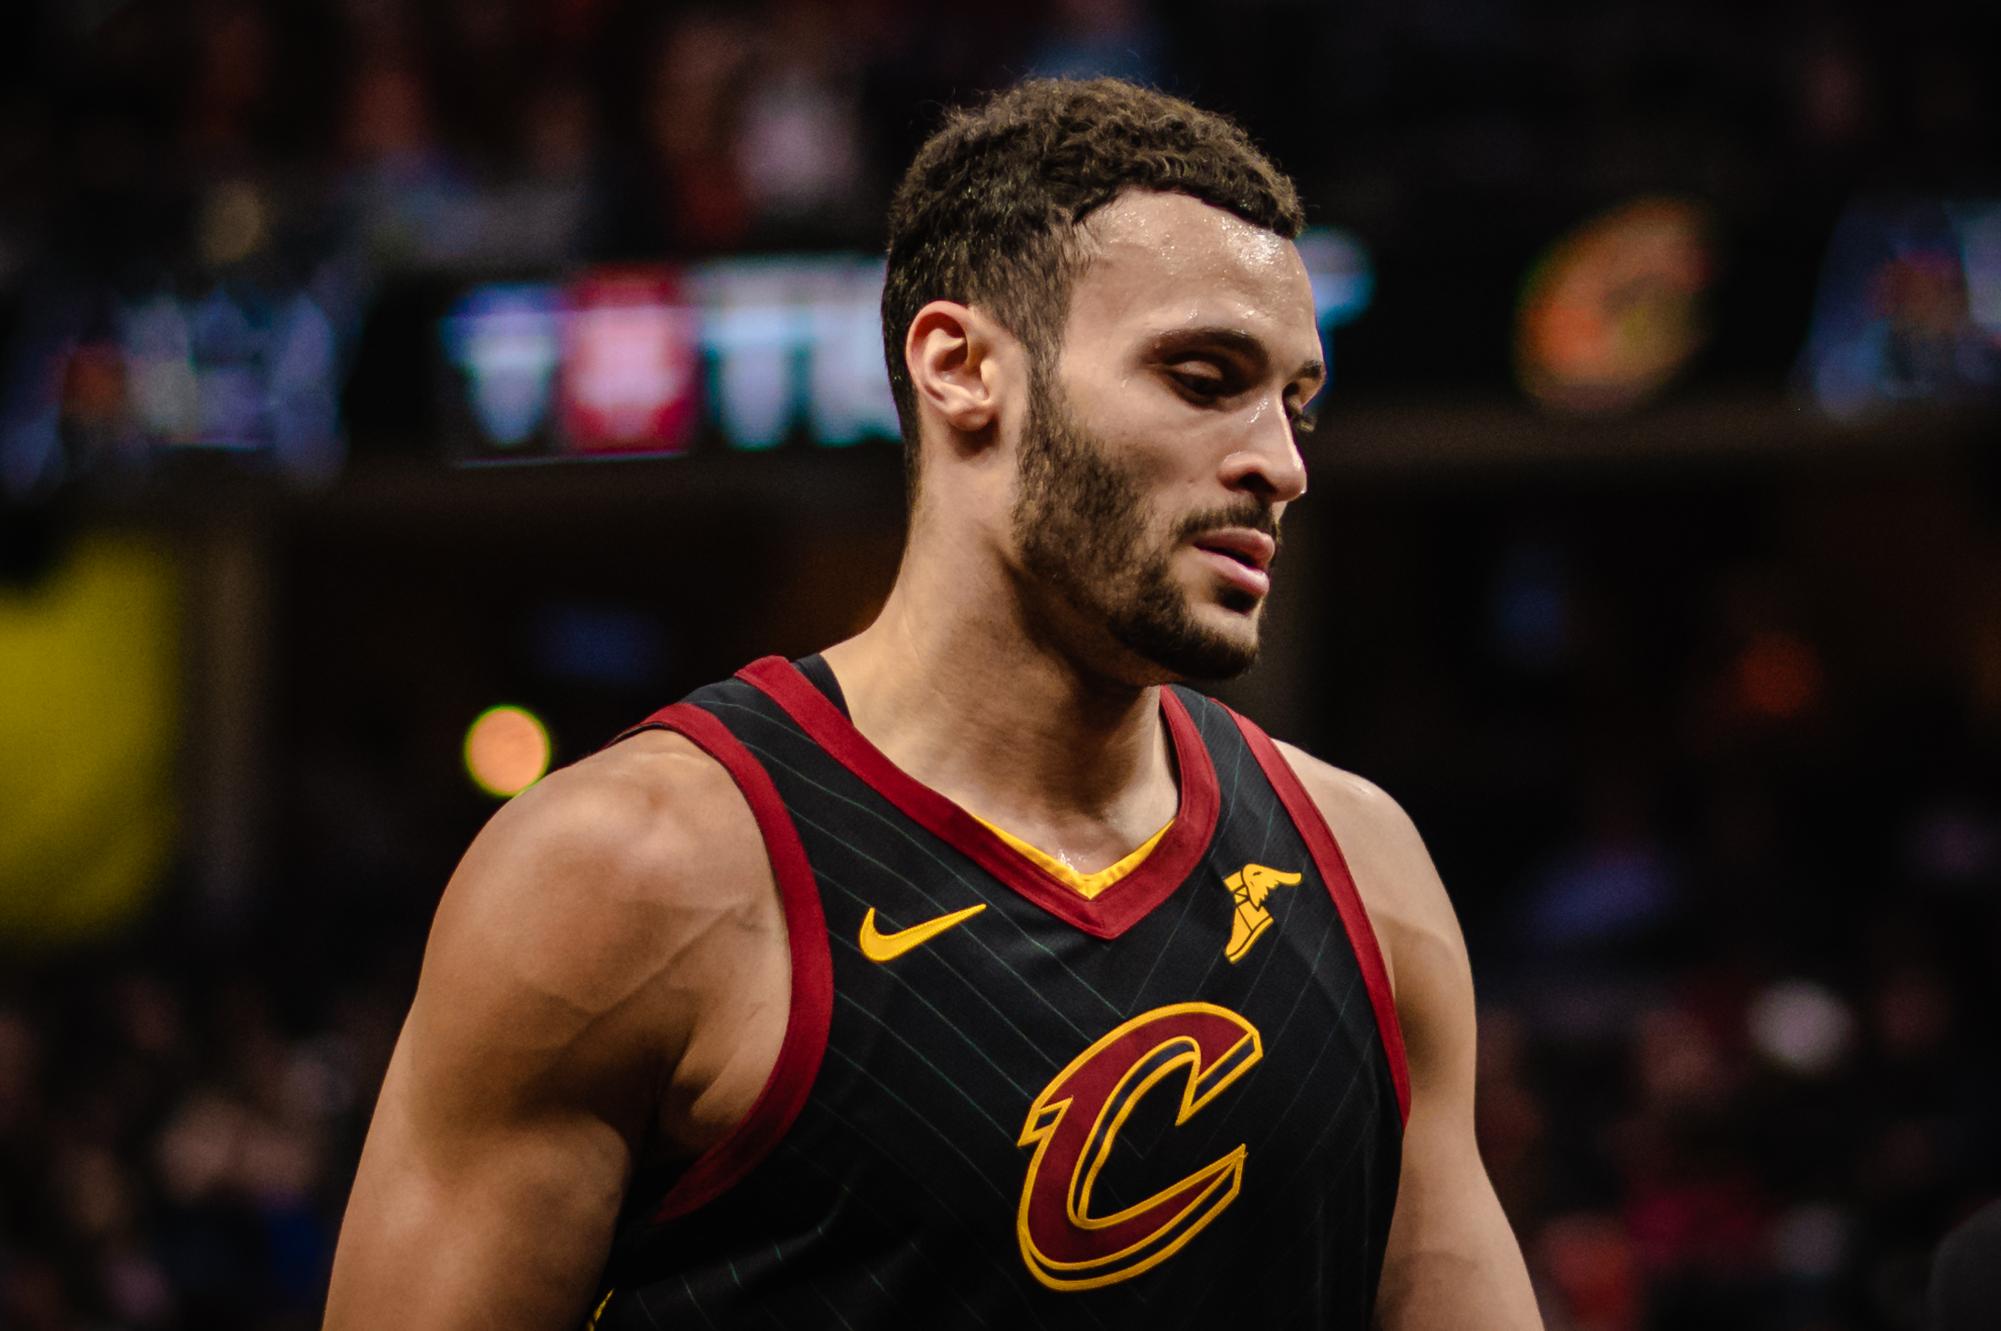 Larry Nance Jr., former Cavs player, has his own Chrons organization that Earp strongly supports. Larry Nance Jr. (47594195861) by Erik Drost is licensed under CC BY 2.0 Deed.